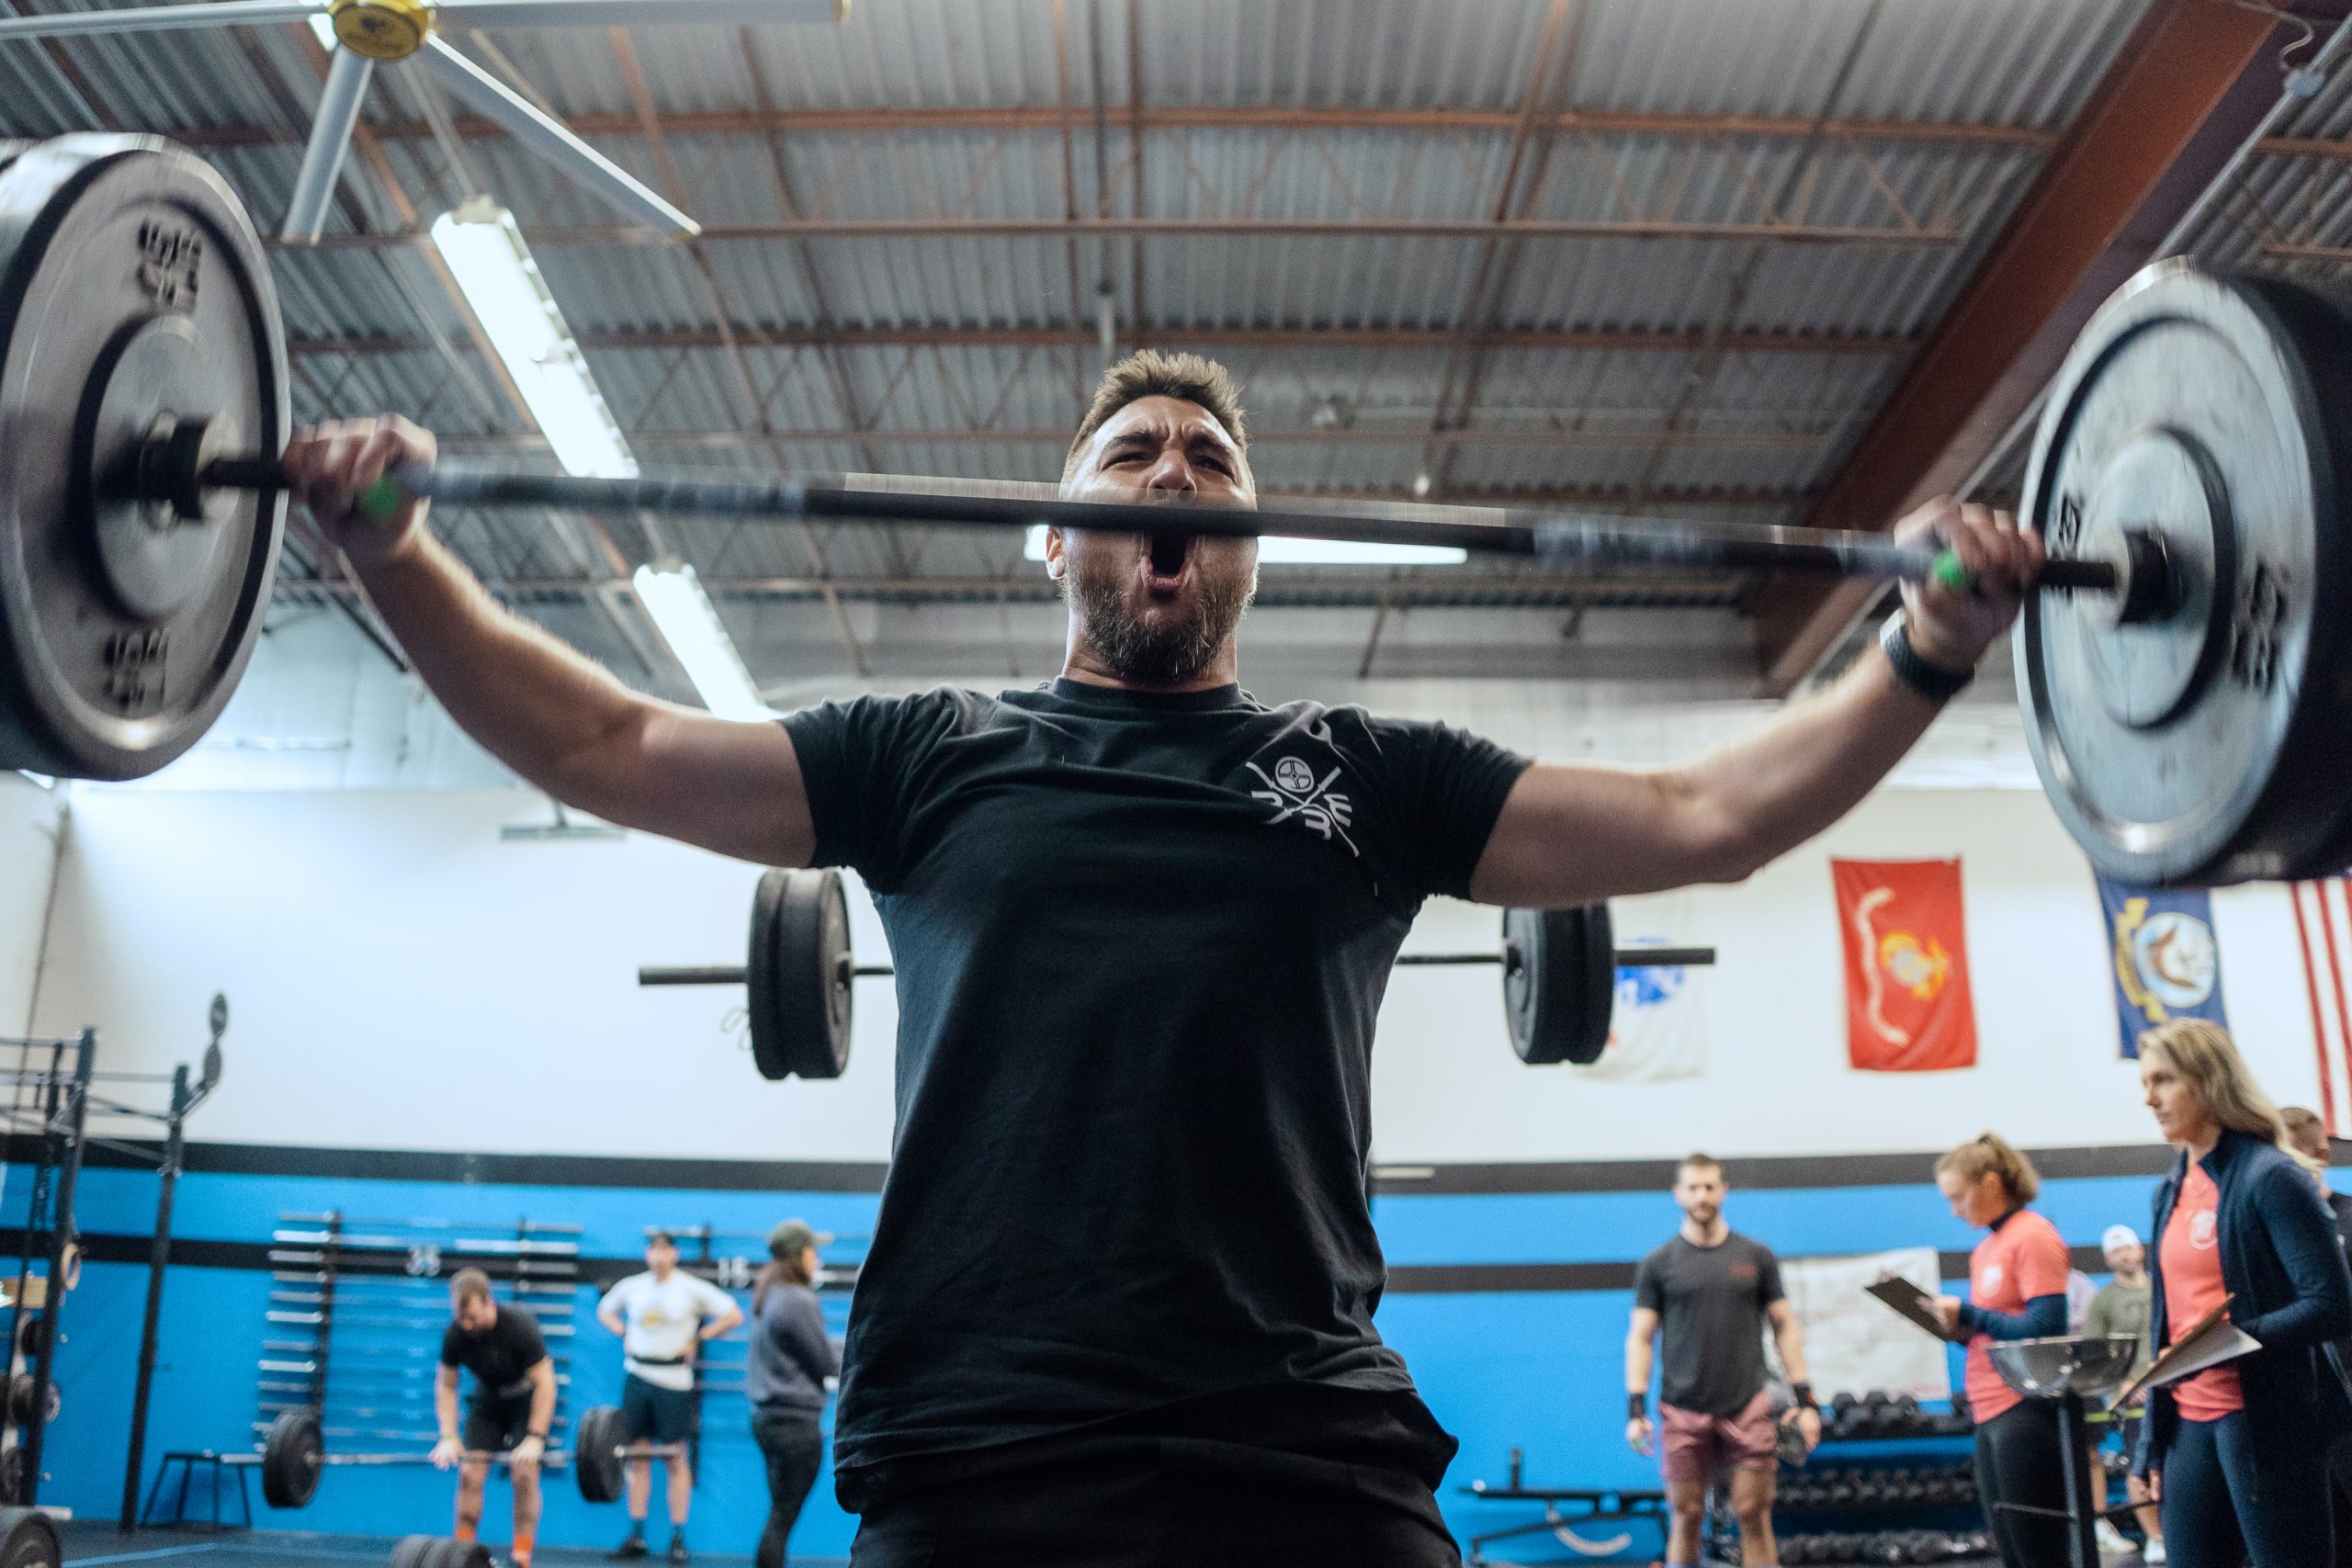 7 Reasons Why You Should Bring Your Camera to a CrossFit Gym